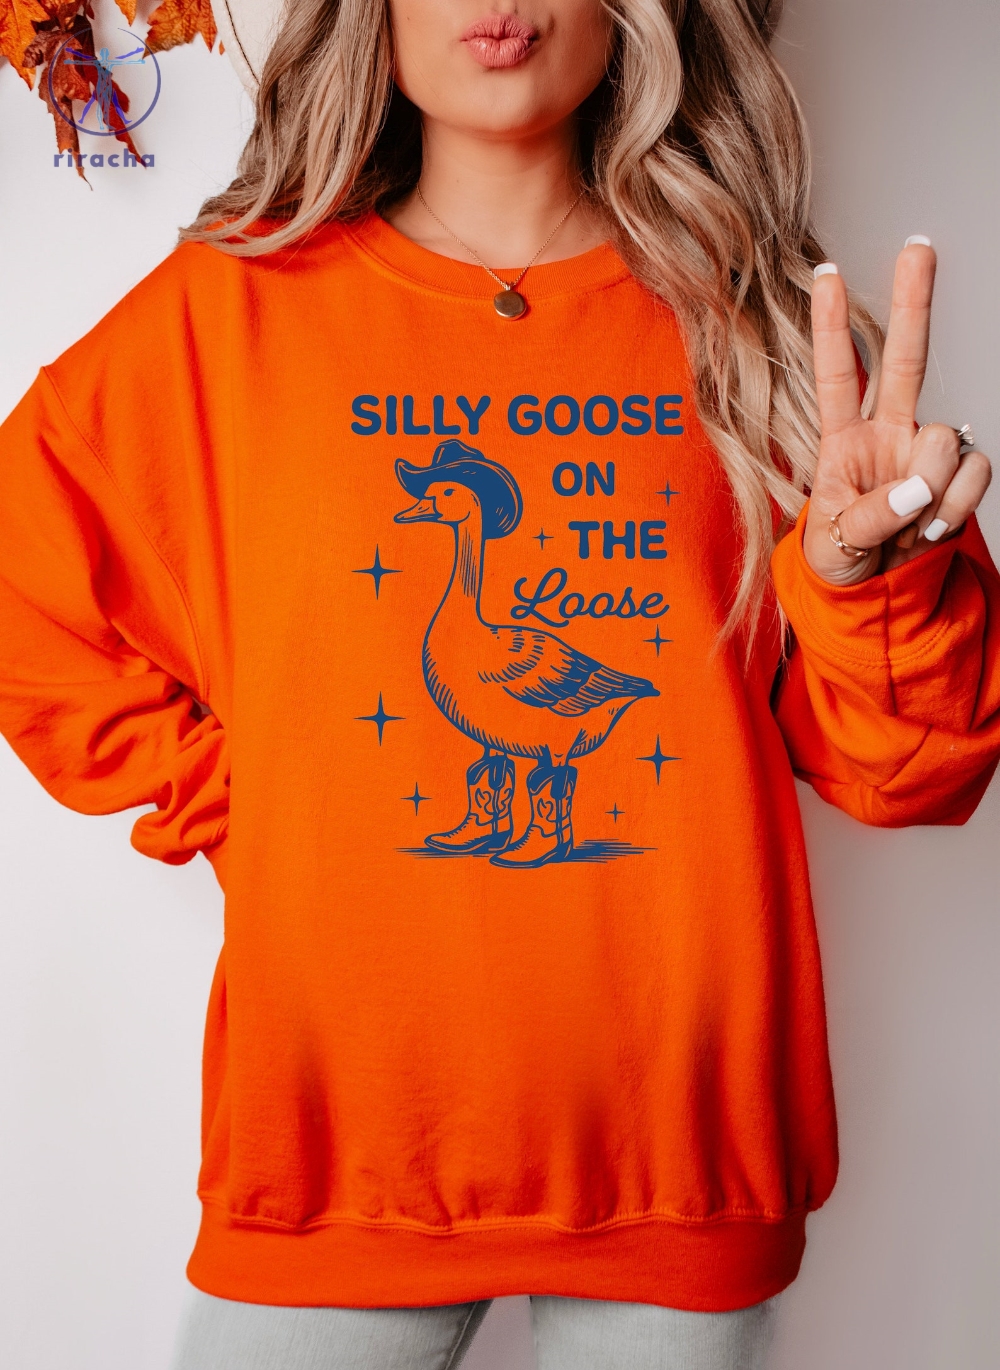 Silly Goose On The Loose T Shirt Silly Goose On The Loose Shirt Silly Goose On The Loose Sweatshirt Unique